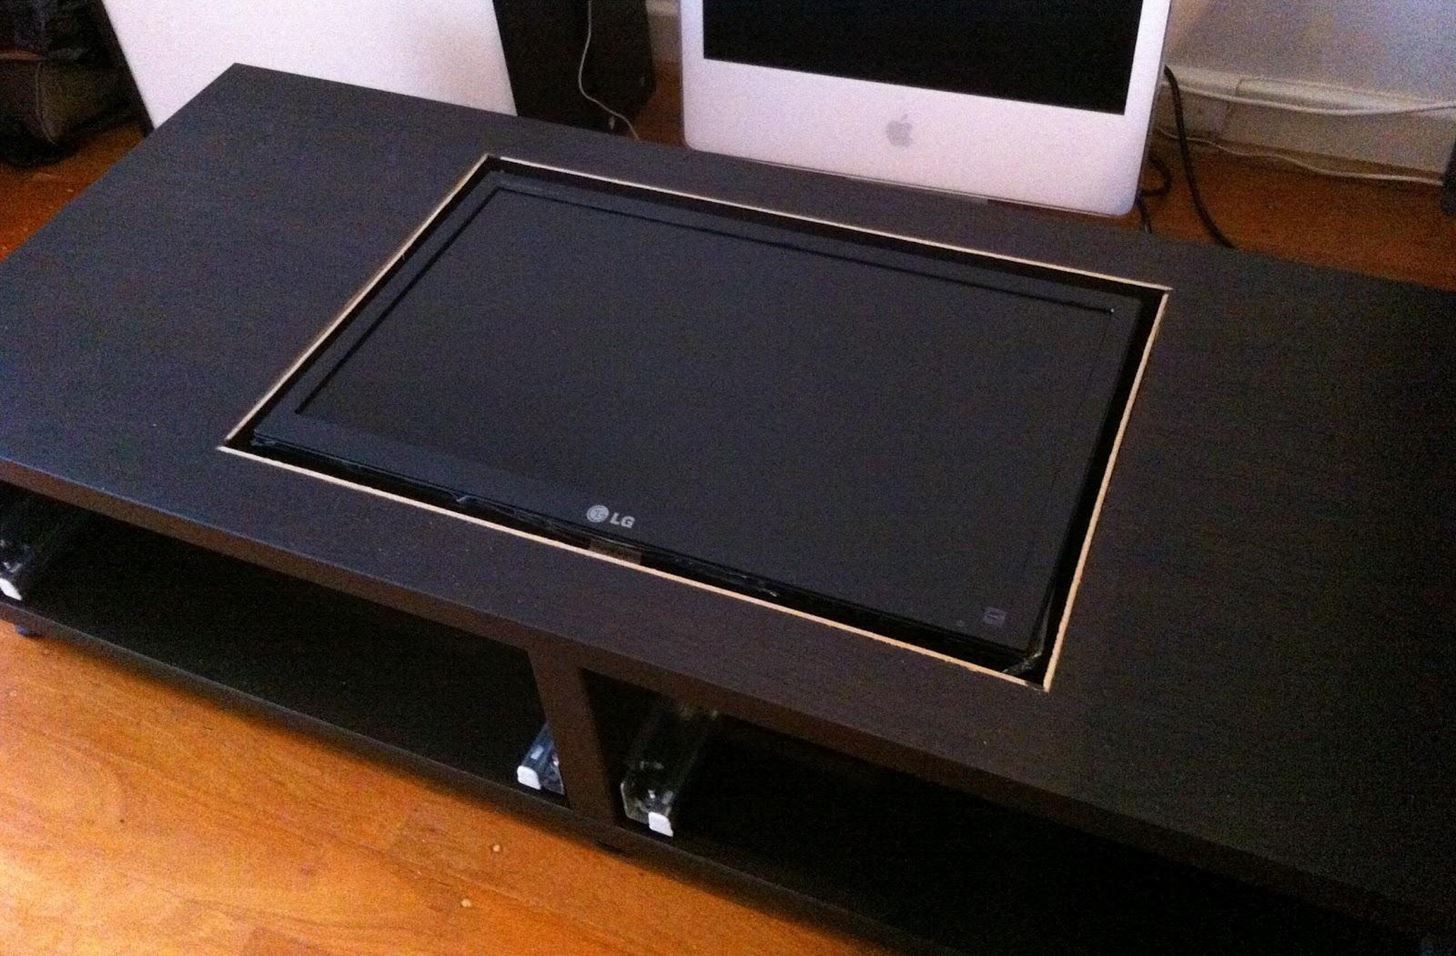 Disguise Your Gaming Addiction with This DIY Coffee Table Arcade 